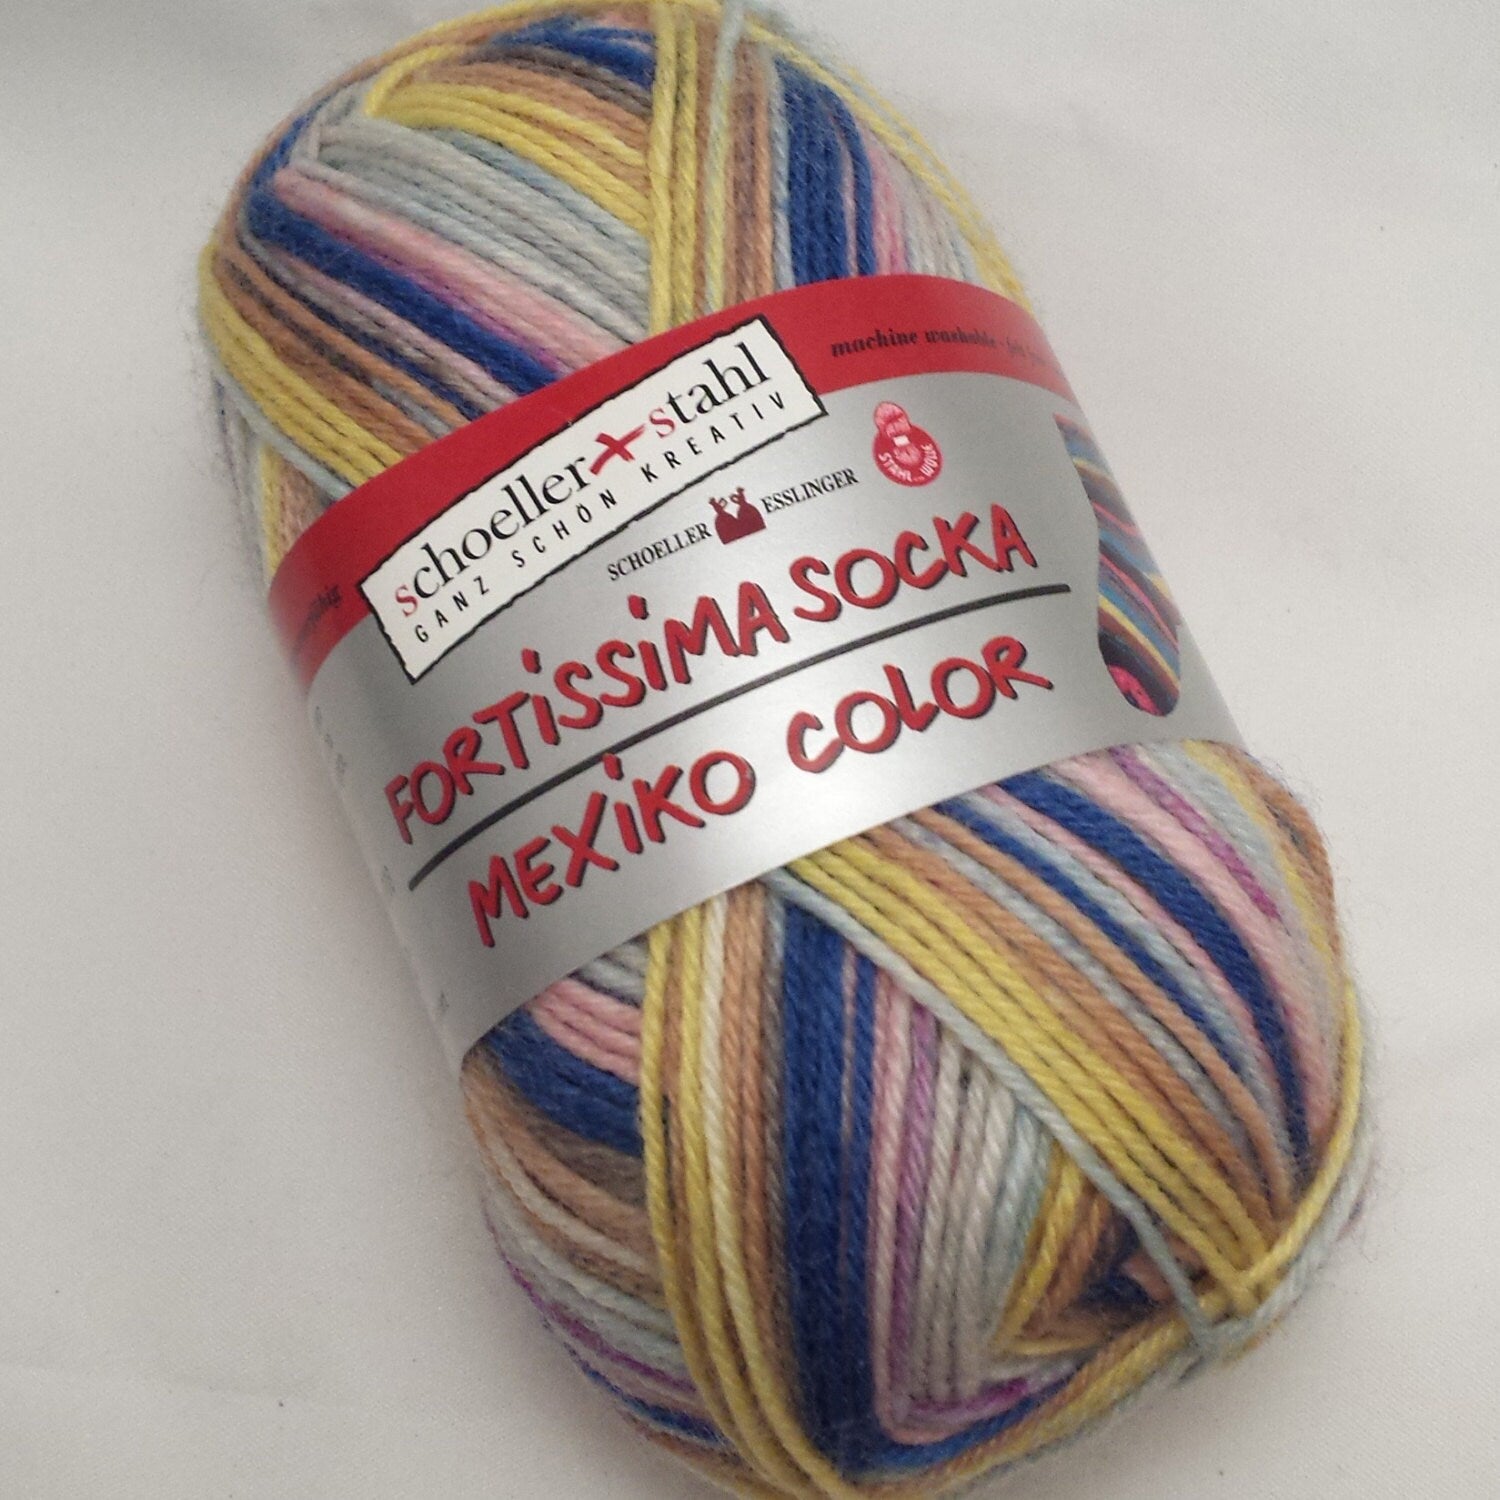 Sock Yarn - Self Patterning. 50g ball of Schoeller and Stahl Fortissima Socka Mexiko Kids Color 037. FREE sock pattern. Wool Polyamide mix